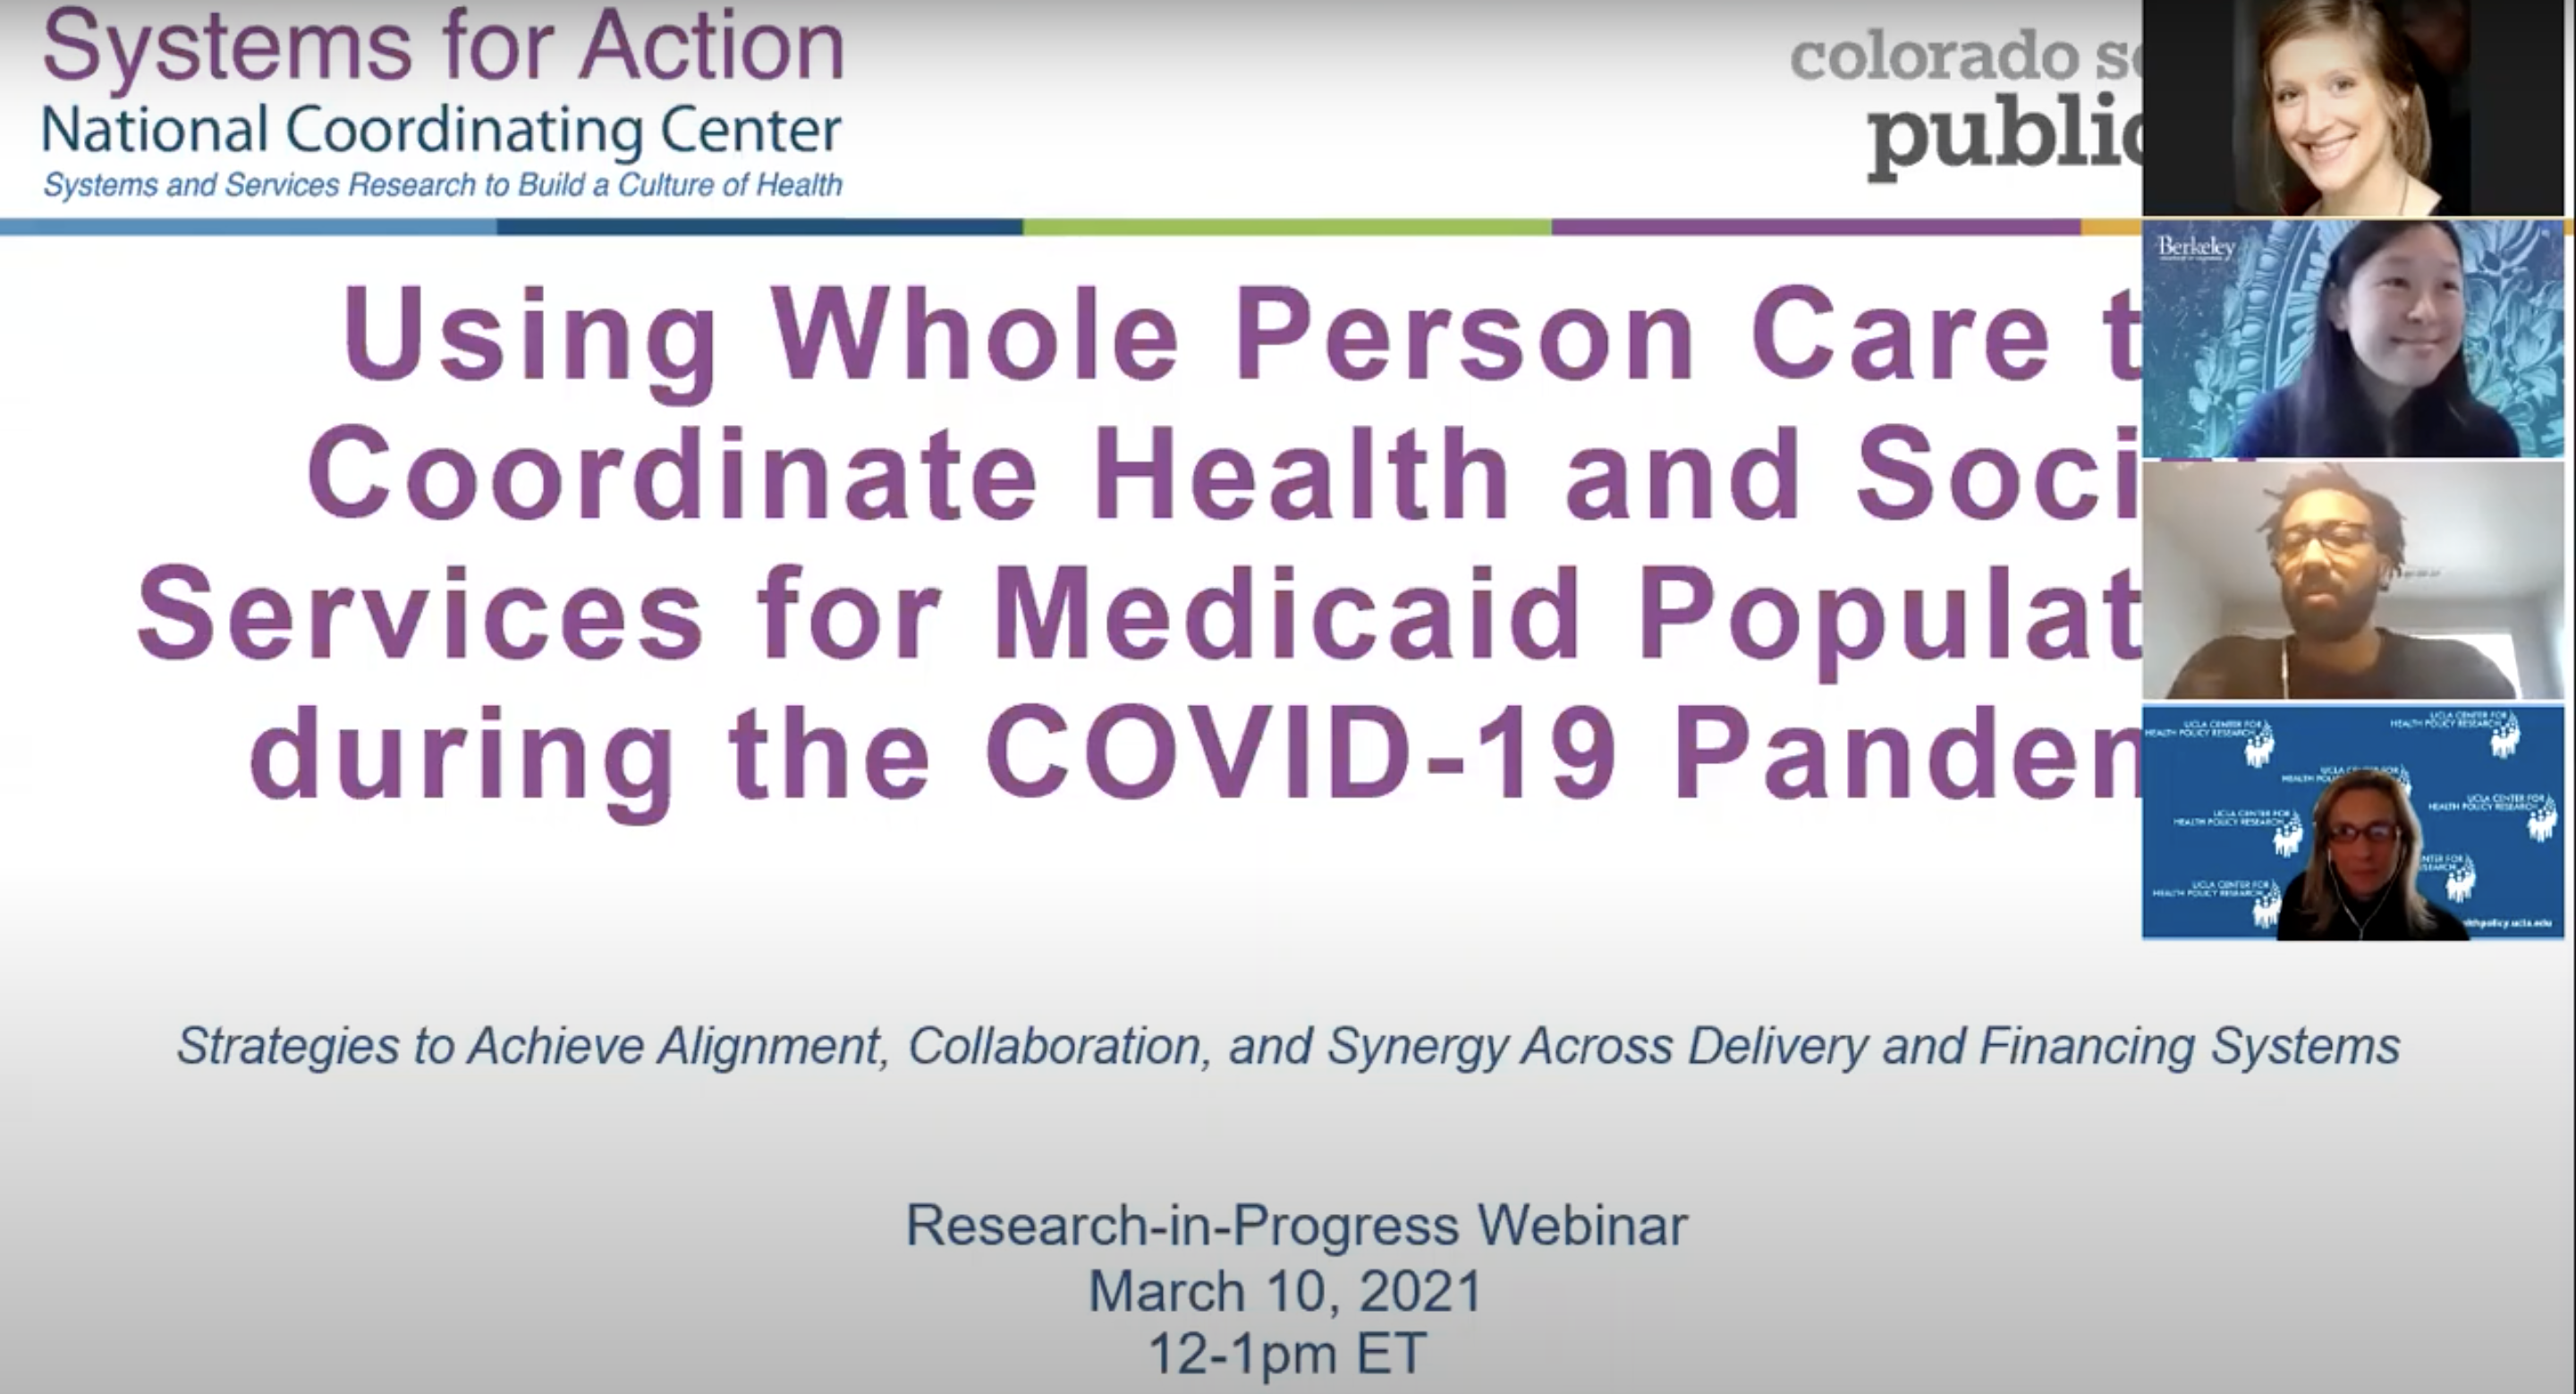 Using Whole-Person Care to Coordinate Health and Social Services for Medicaid Populations during the COVID-19 Pandemic